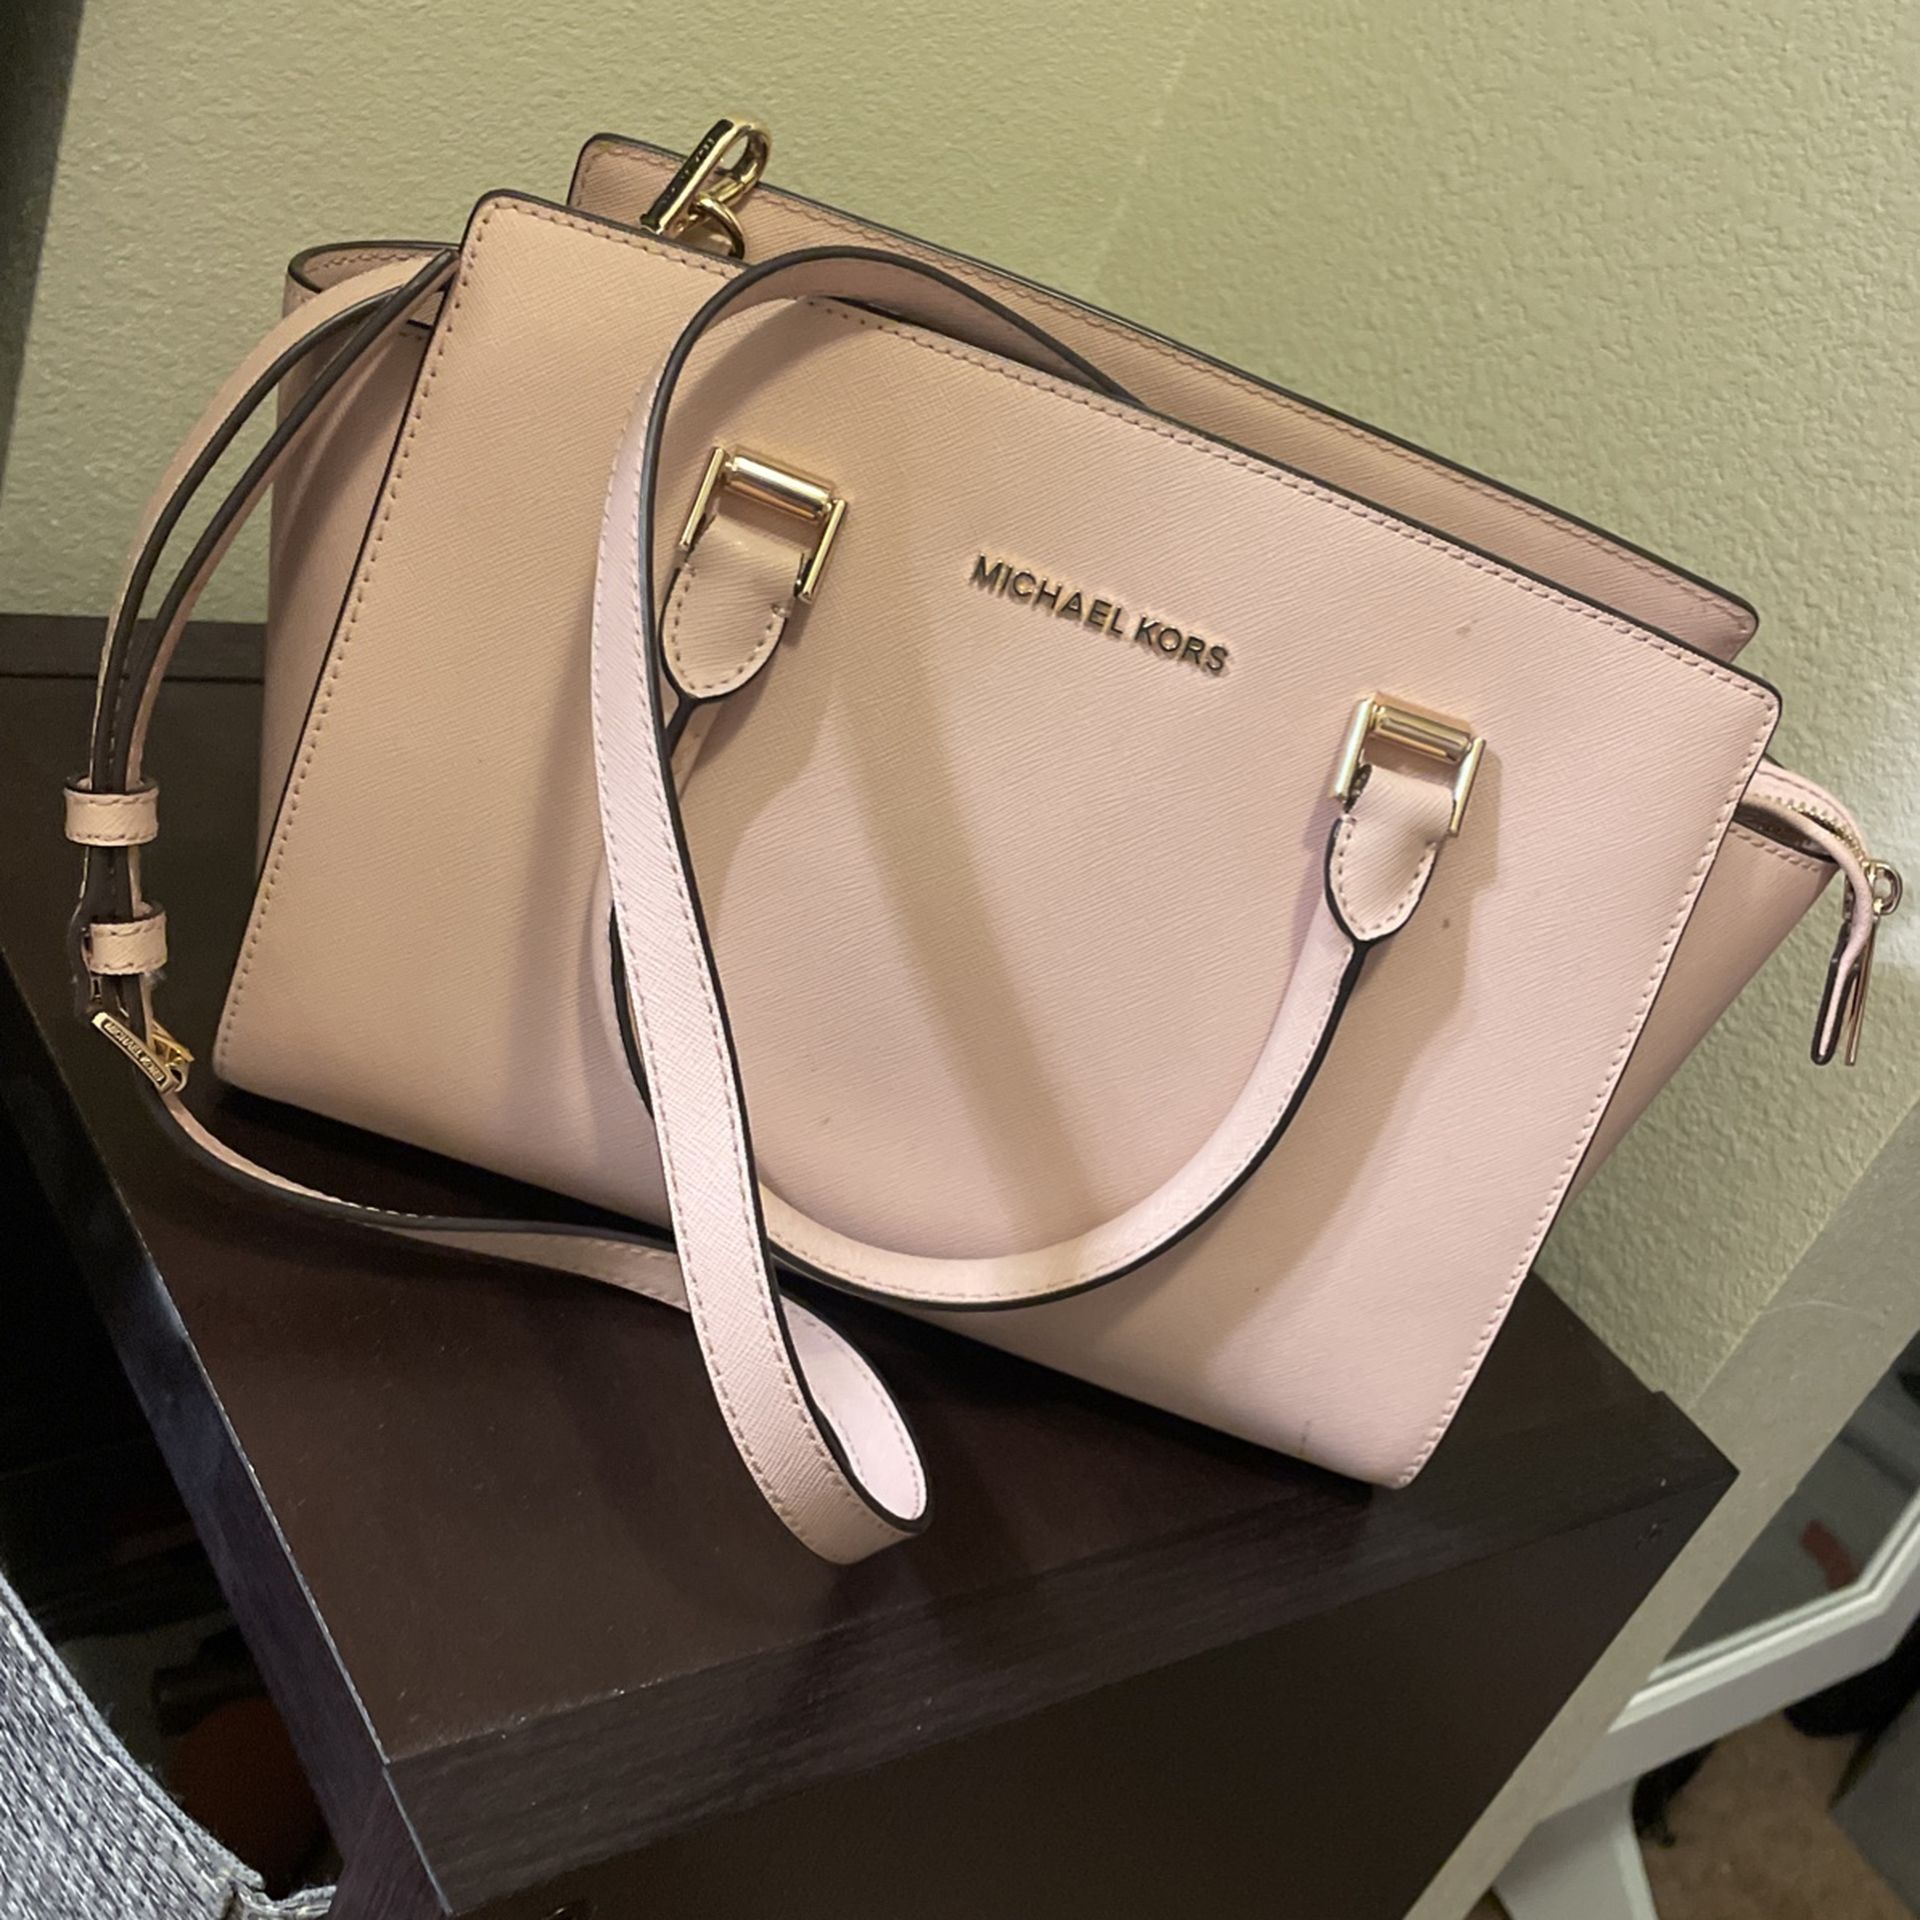 Michael Kors Cindy Dome Crossbody Bag for Sale in Arlington, TX - OfferUp